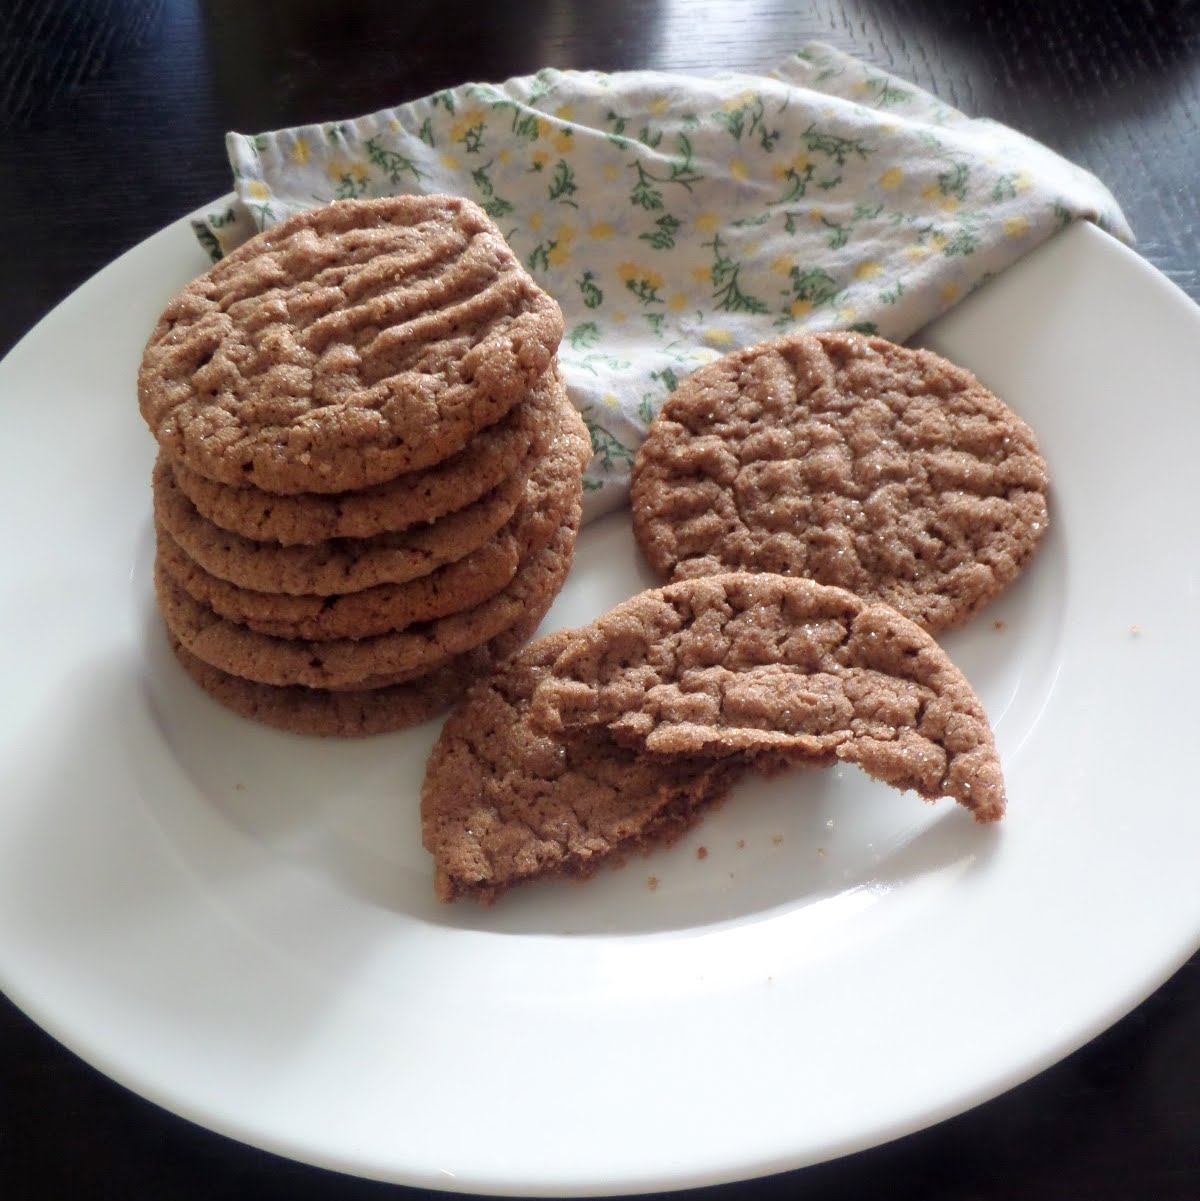 Nutella Cookies:  A traditional peanut butter cookie made non traditional by using Nutella instead of peanut butter.